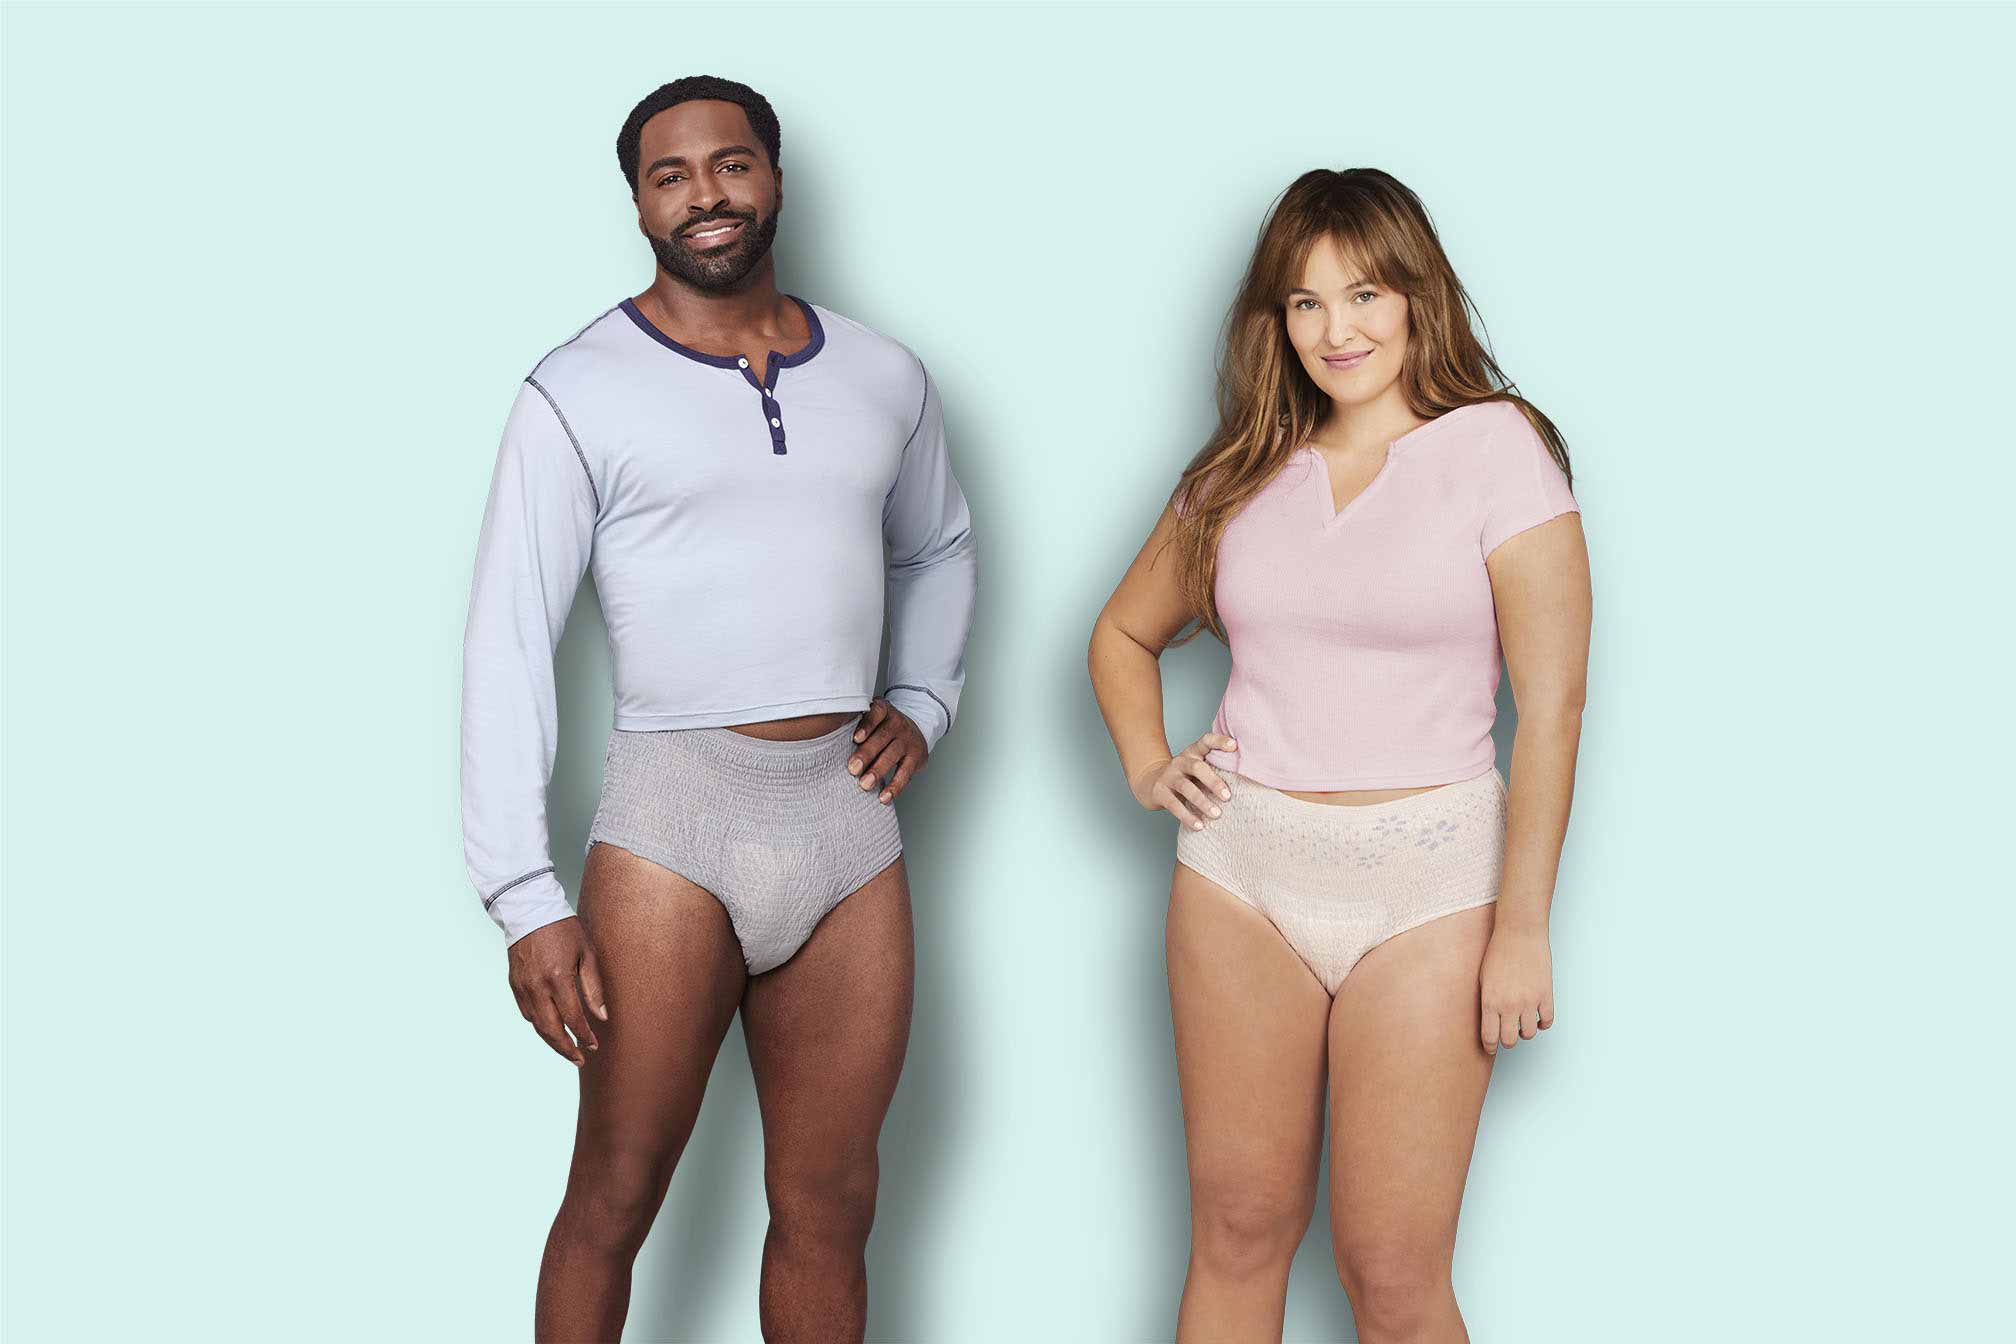 The Ultimate Guide to Adult Diapers and Alternative Incontinence Products